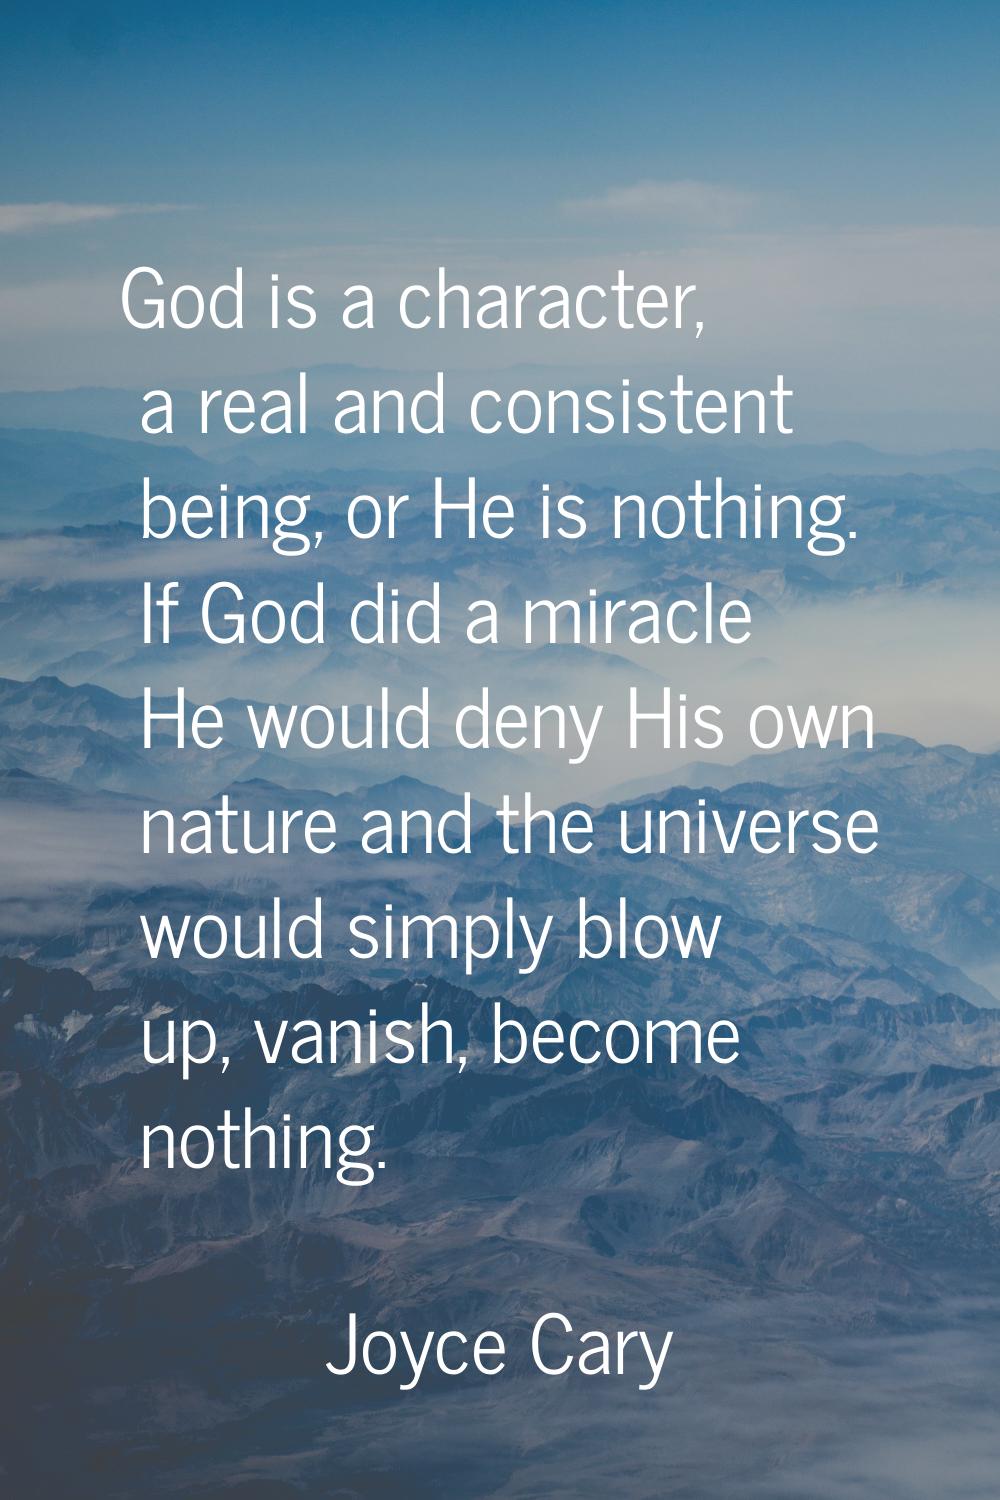 God is a character, a real and consistent being, or He is nothing. If God did a miracle He would de